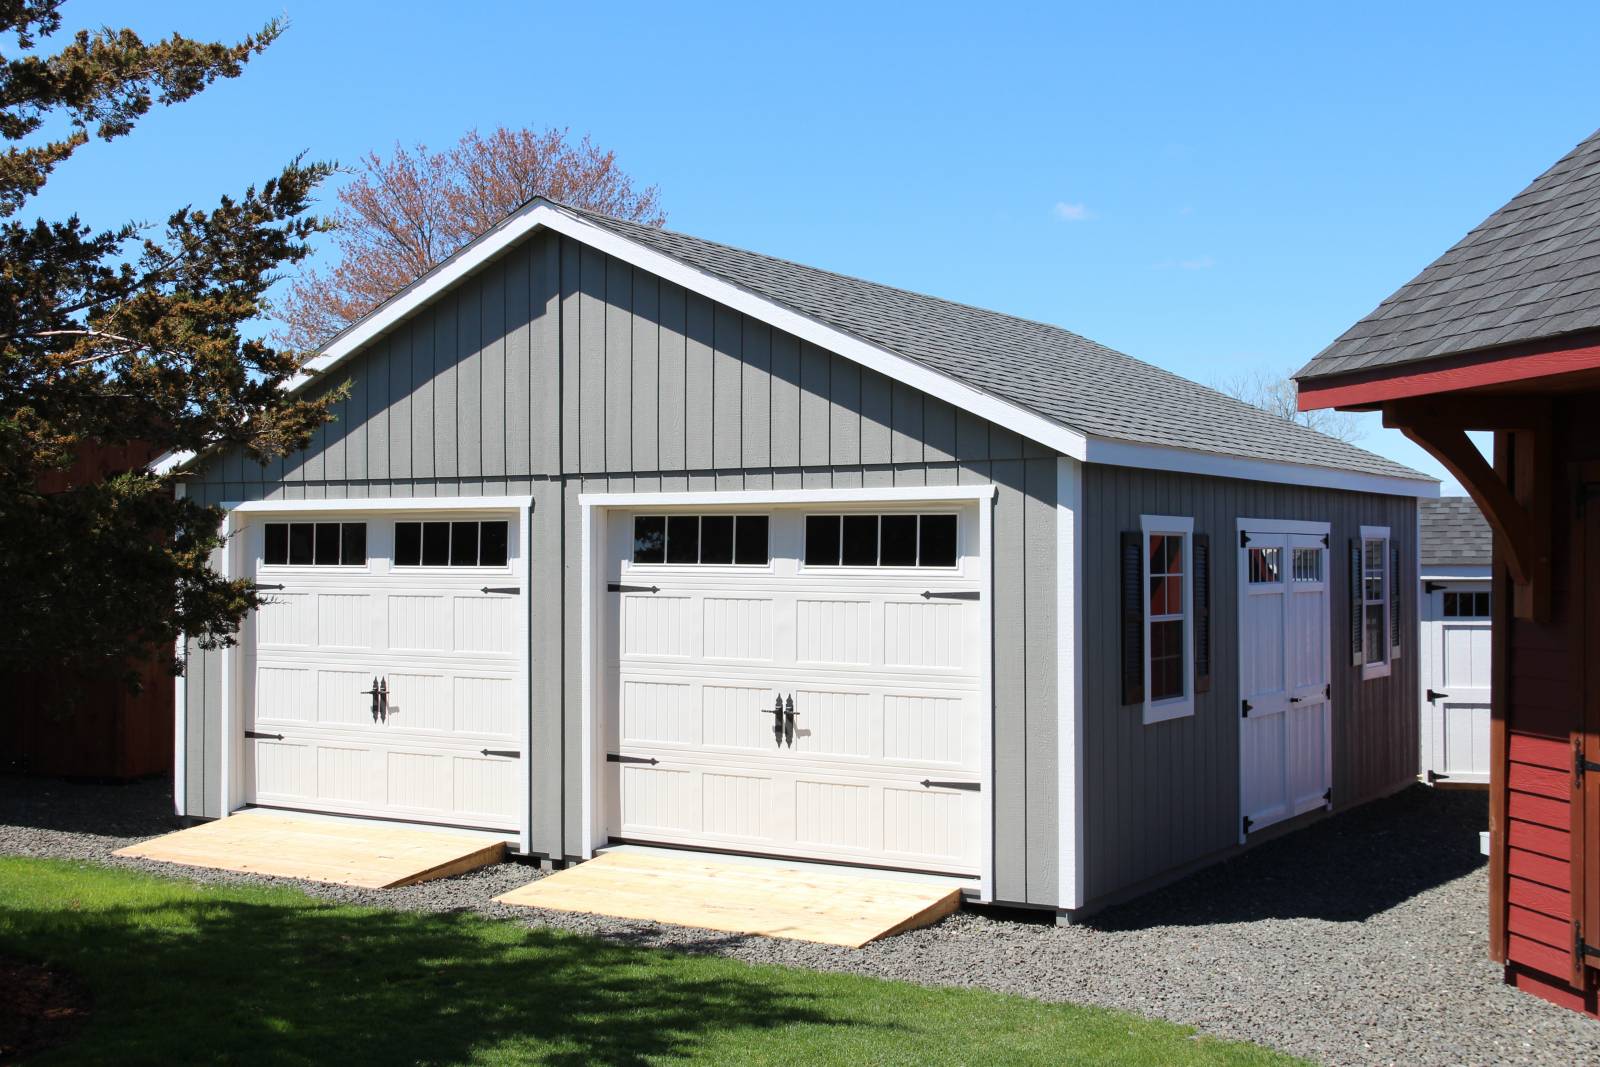 24' x 24' Classic Vintage Garage Shown with Options